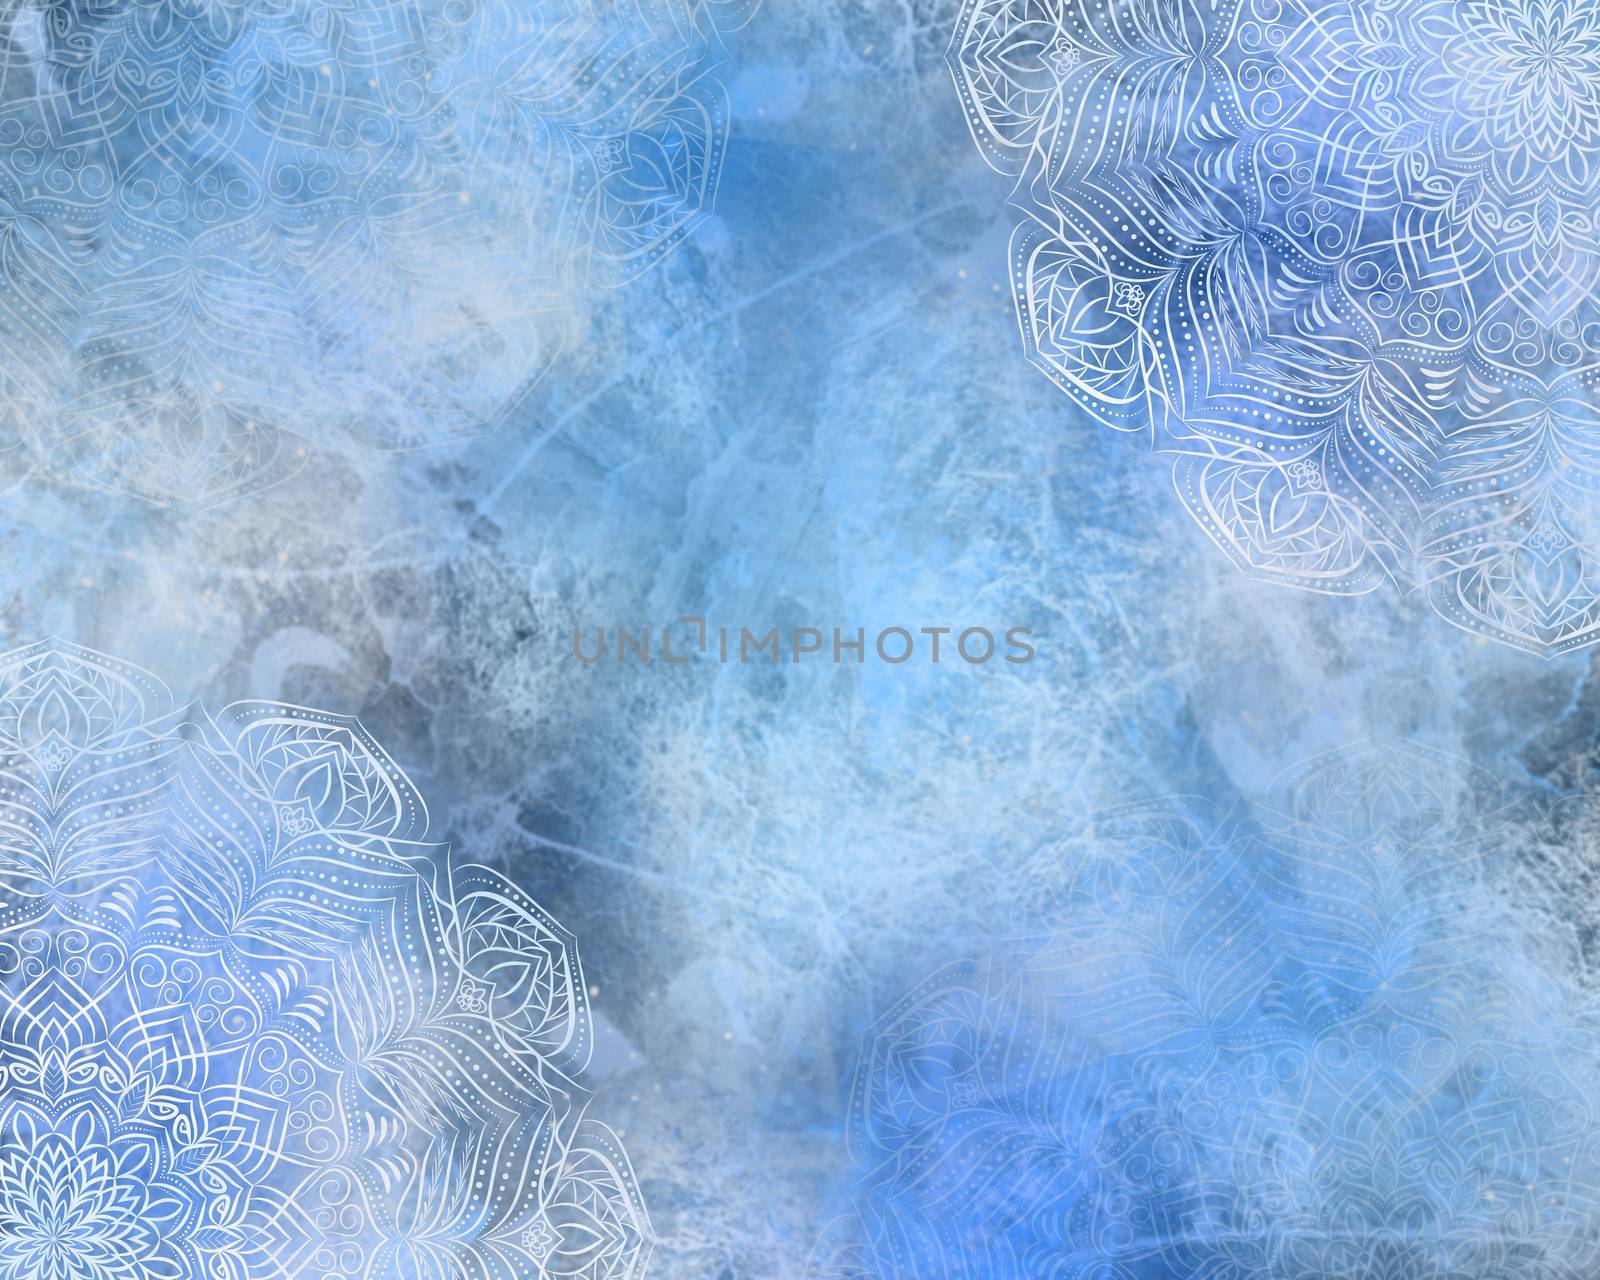 Blue mystic abstract mandala background by GraffiTimi